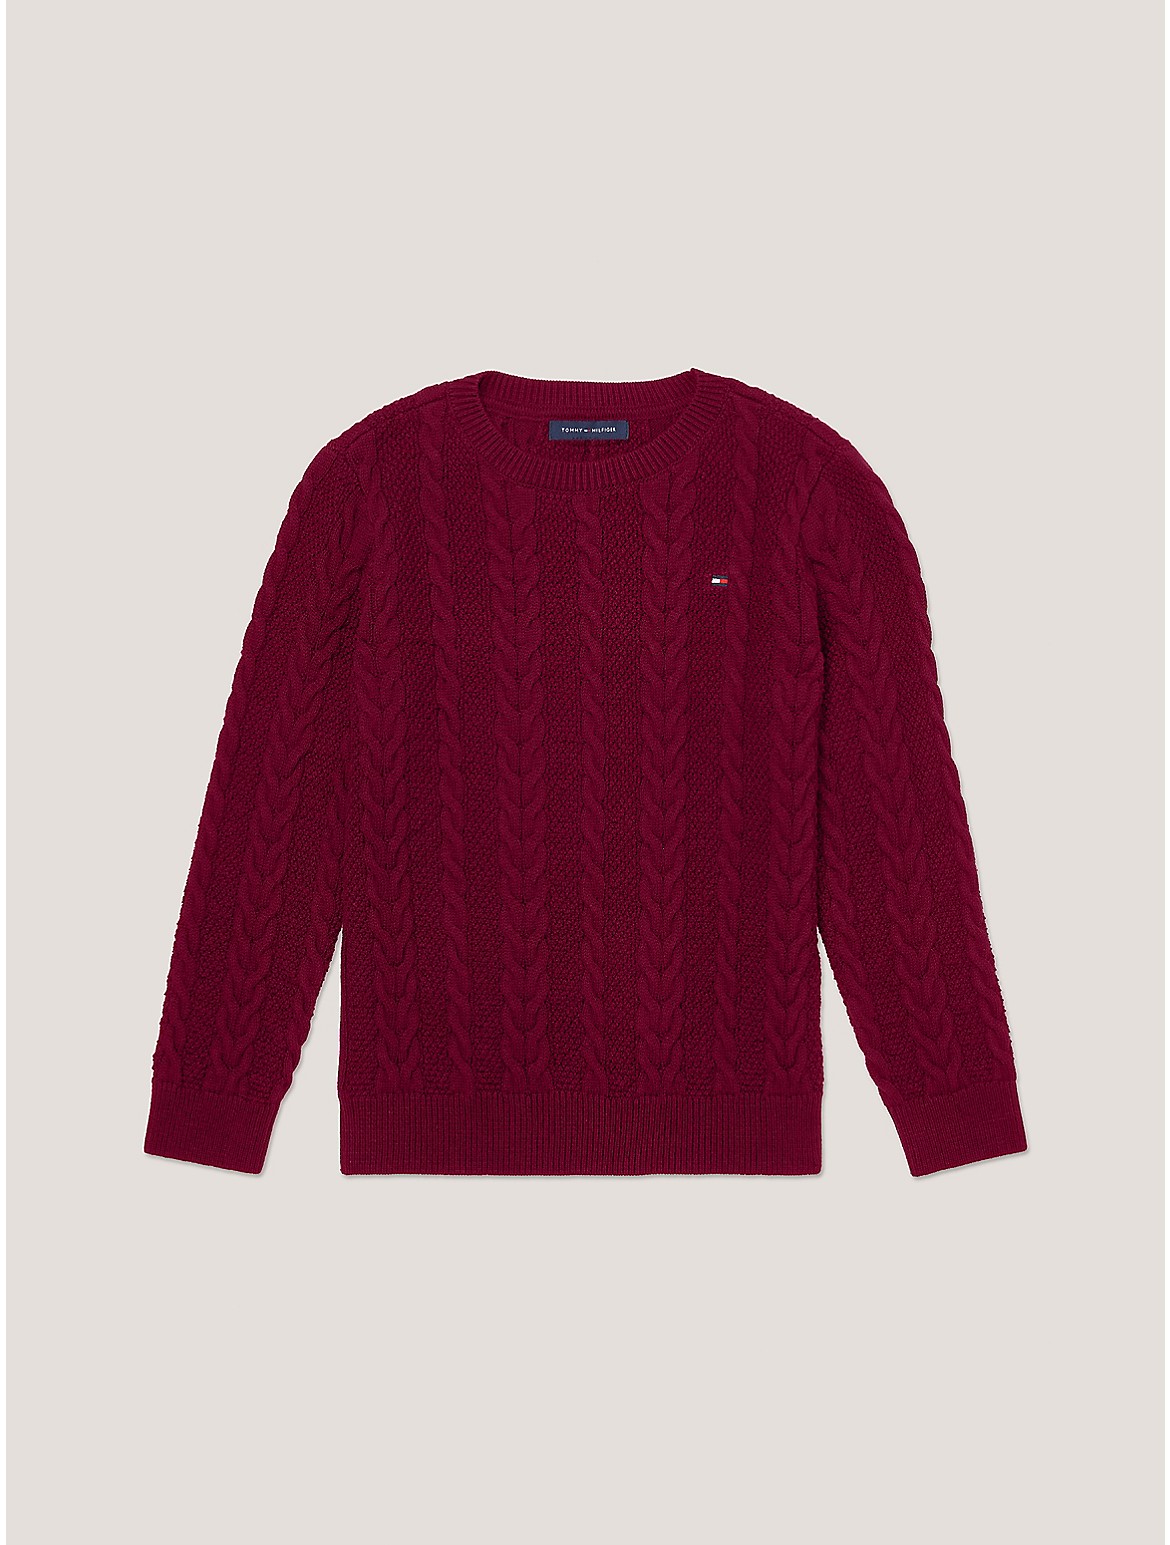 Tommy Hilfiger Boys' Kids' Cable Knit Sweater - Red - XXS